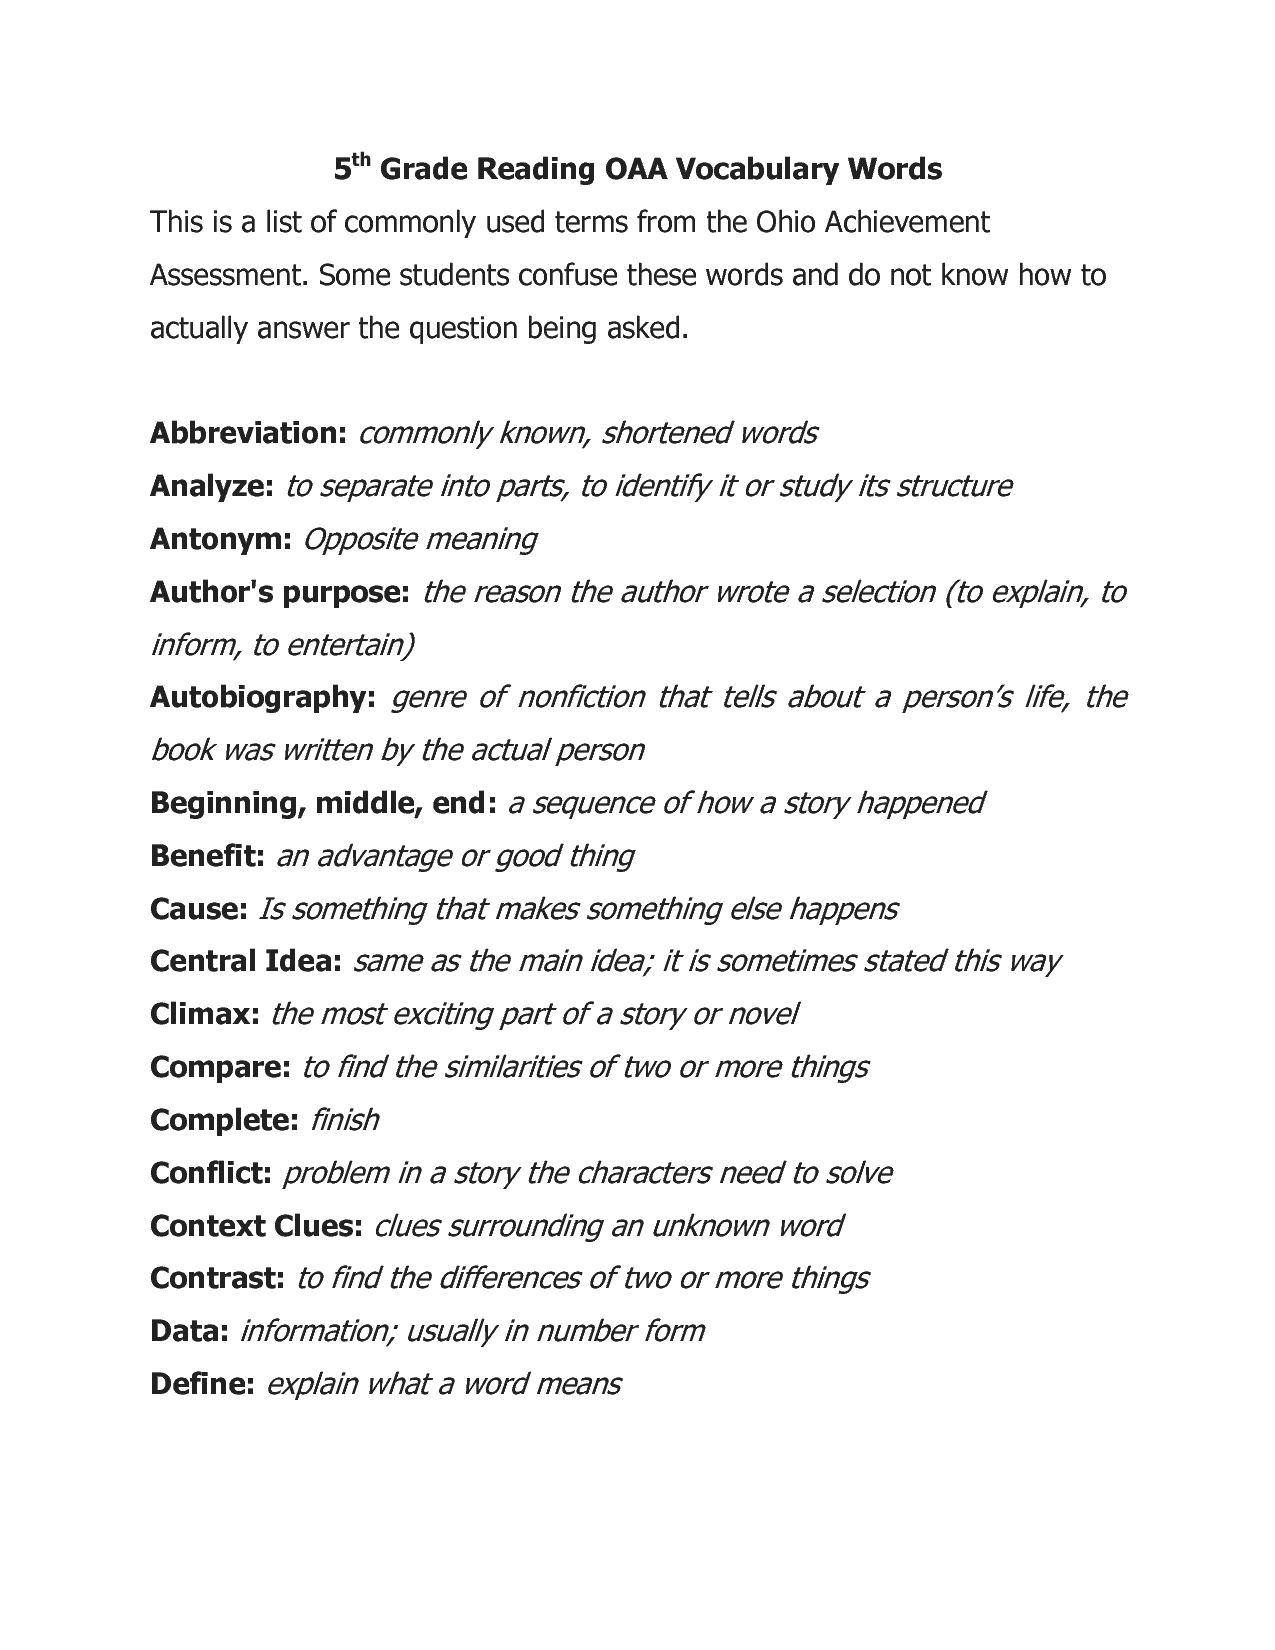 definitions-printable